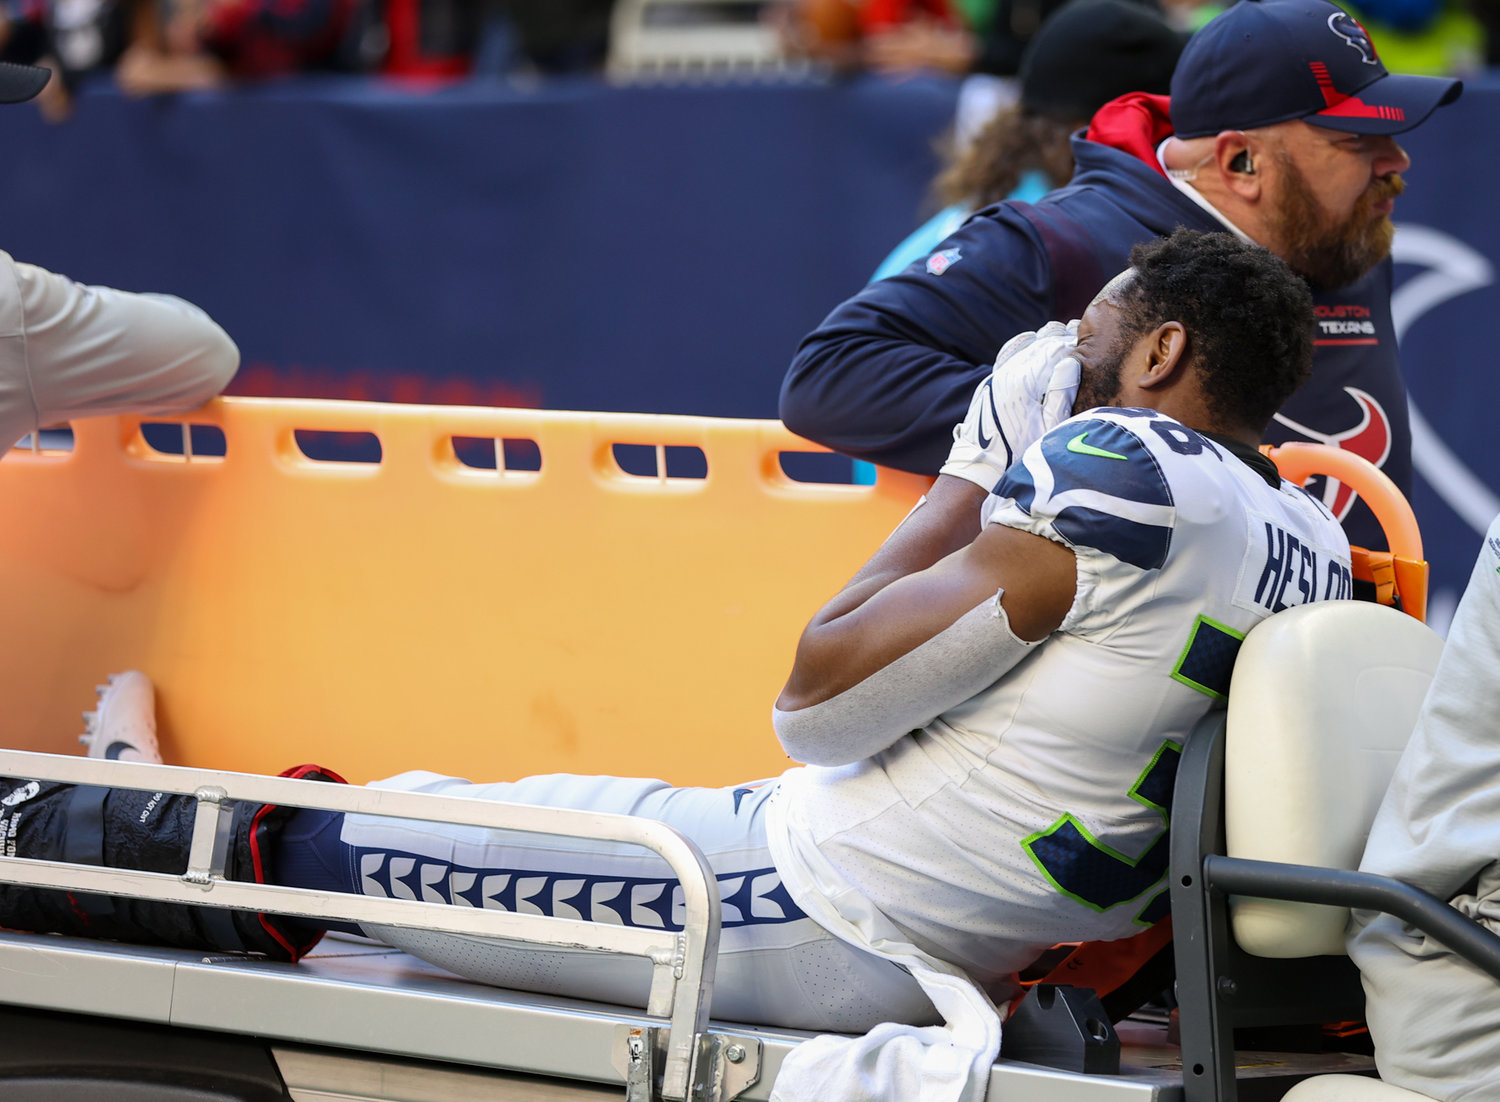 Seattle Seahawks cornerback Gavin Heslop (38) is carted off the field after sustaining a leg injury during the second half of an NFL game between the Seahawks and the Texans on December 12, 2021 in Houston, Texas.